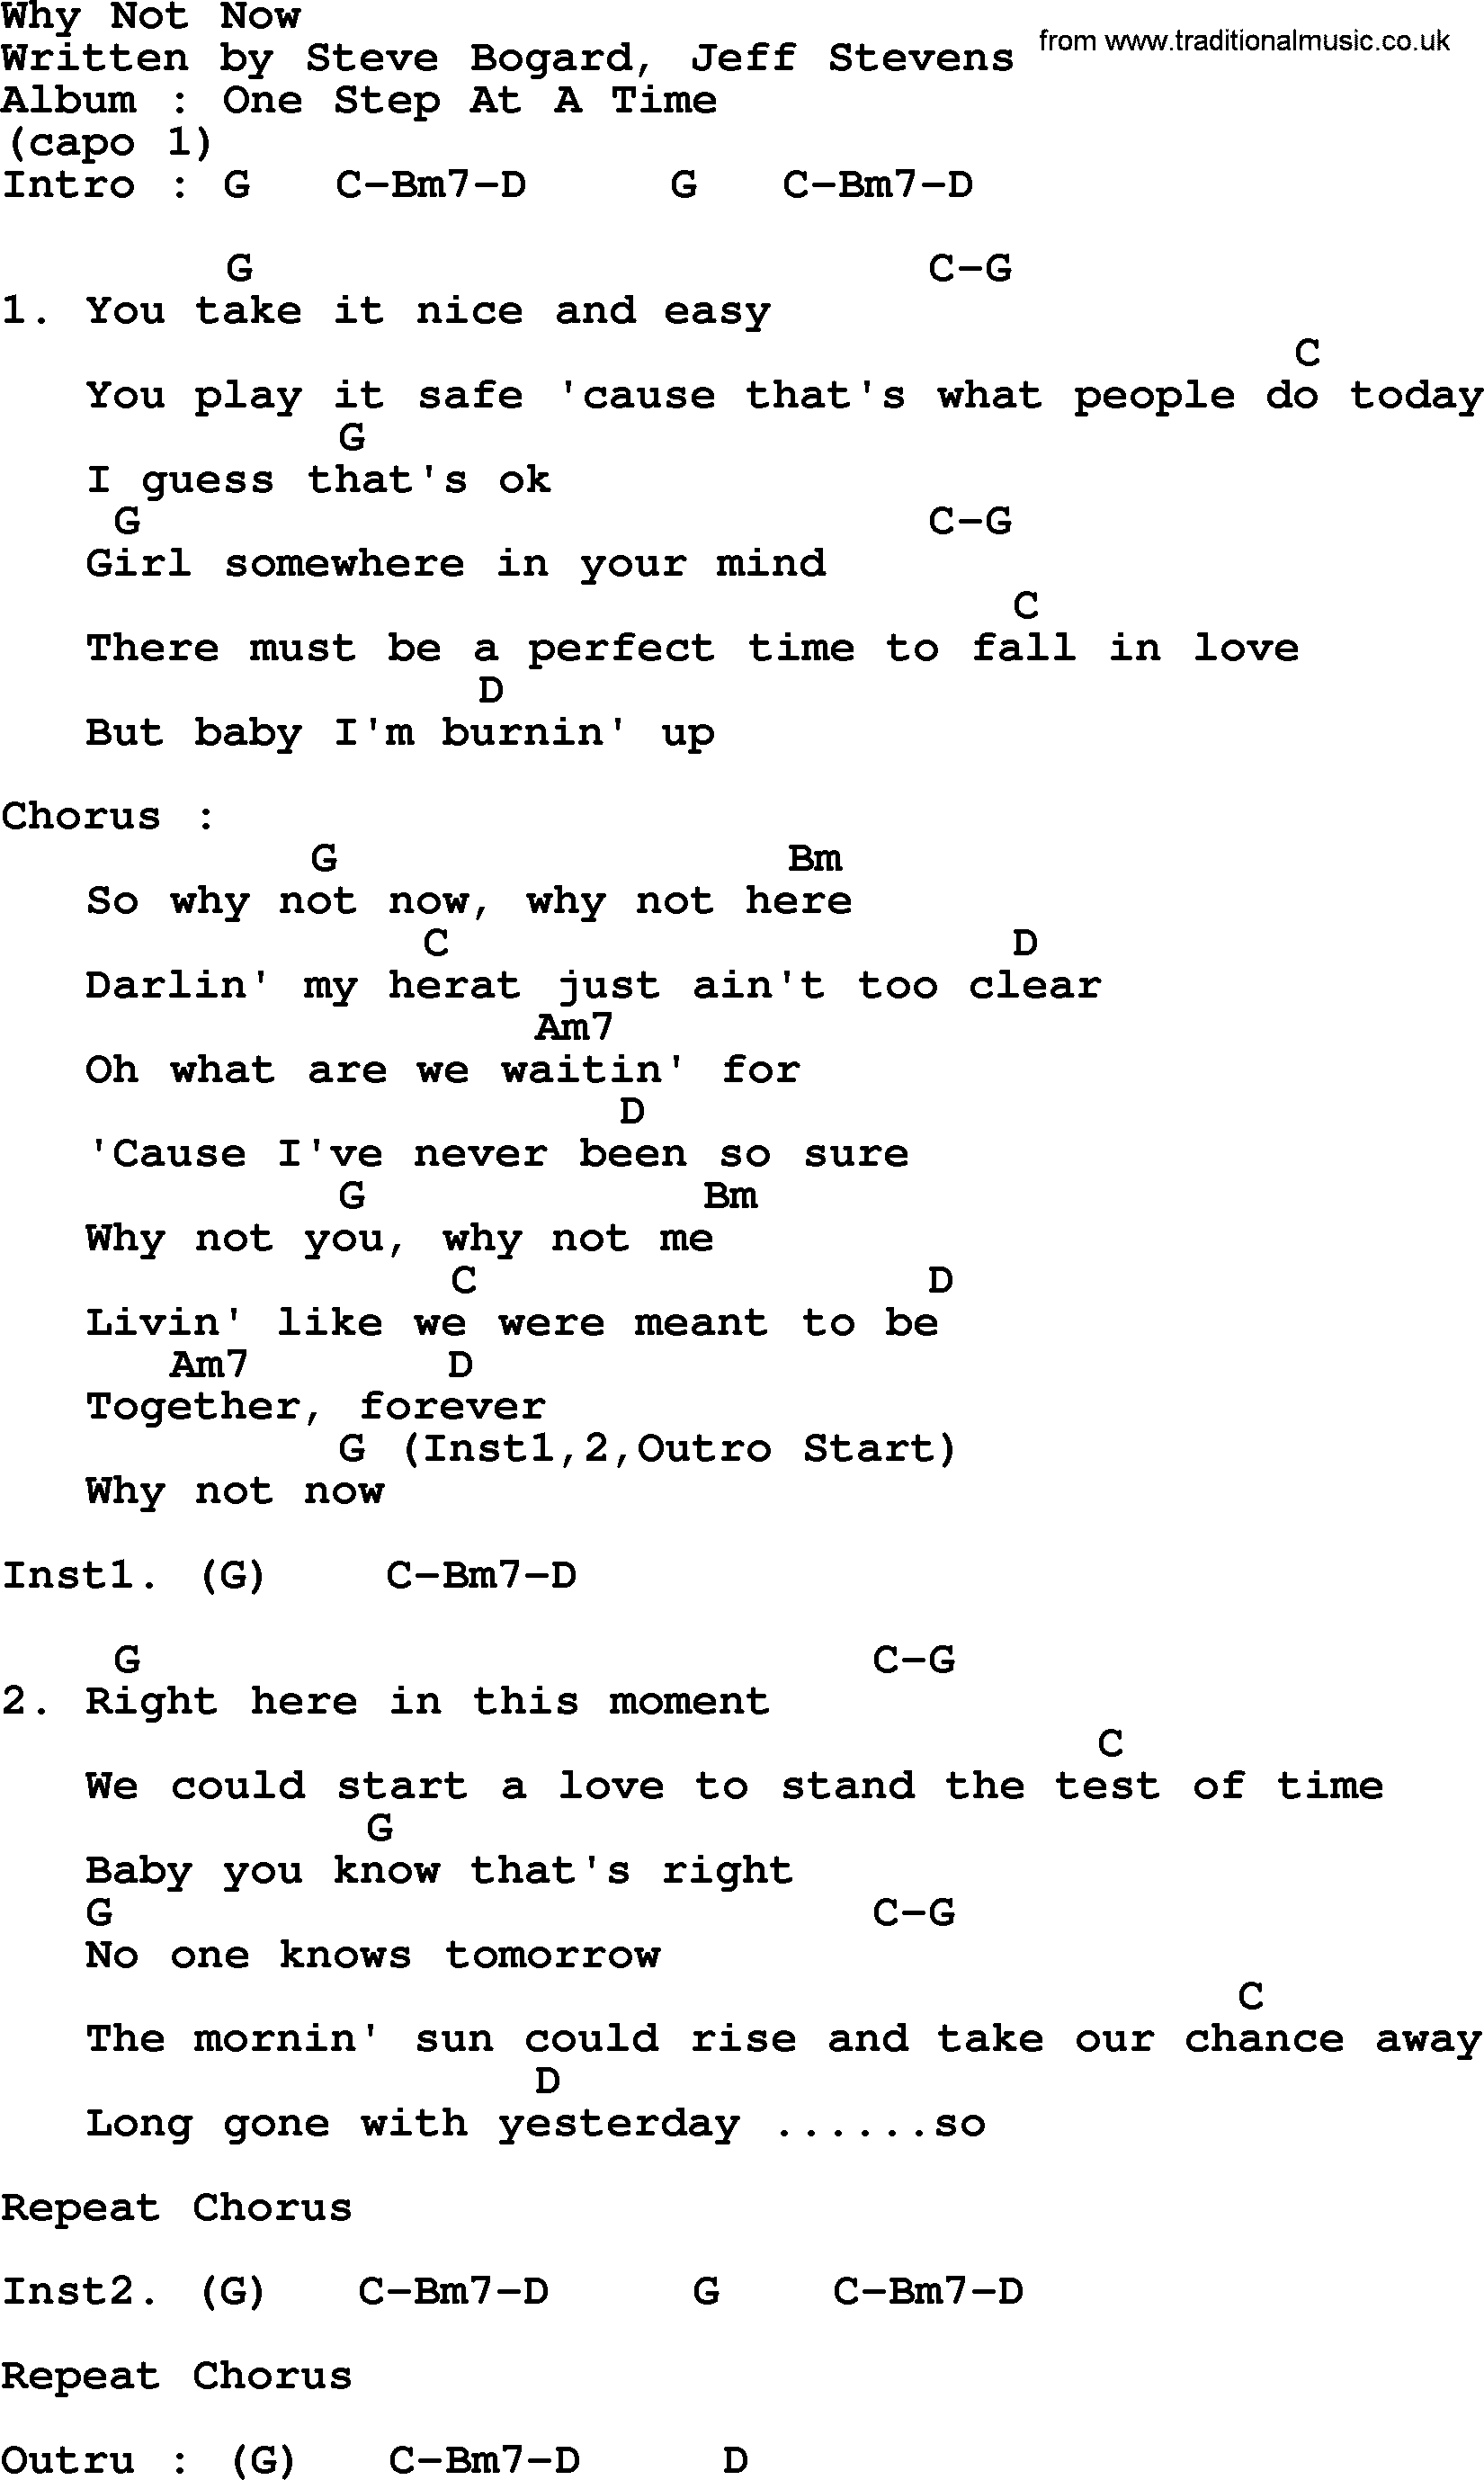 George Strait song: Why Not Now, lyrics and chords